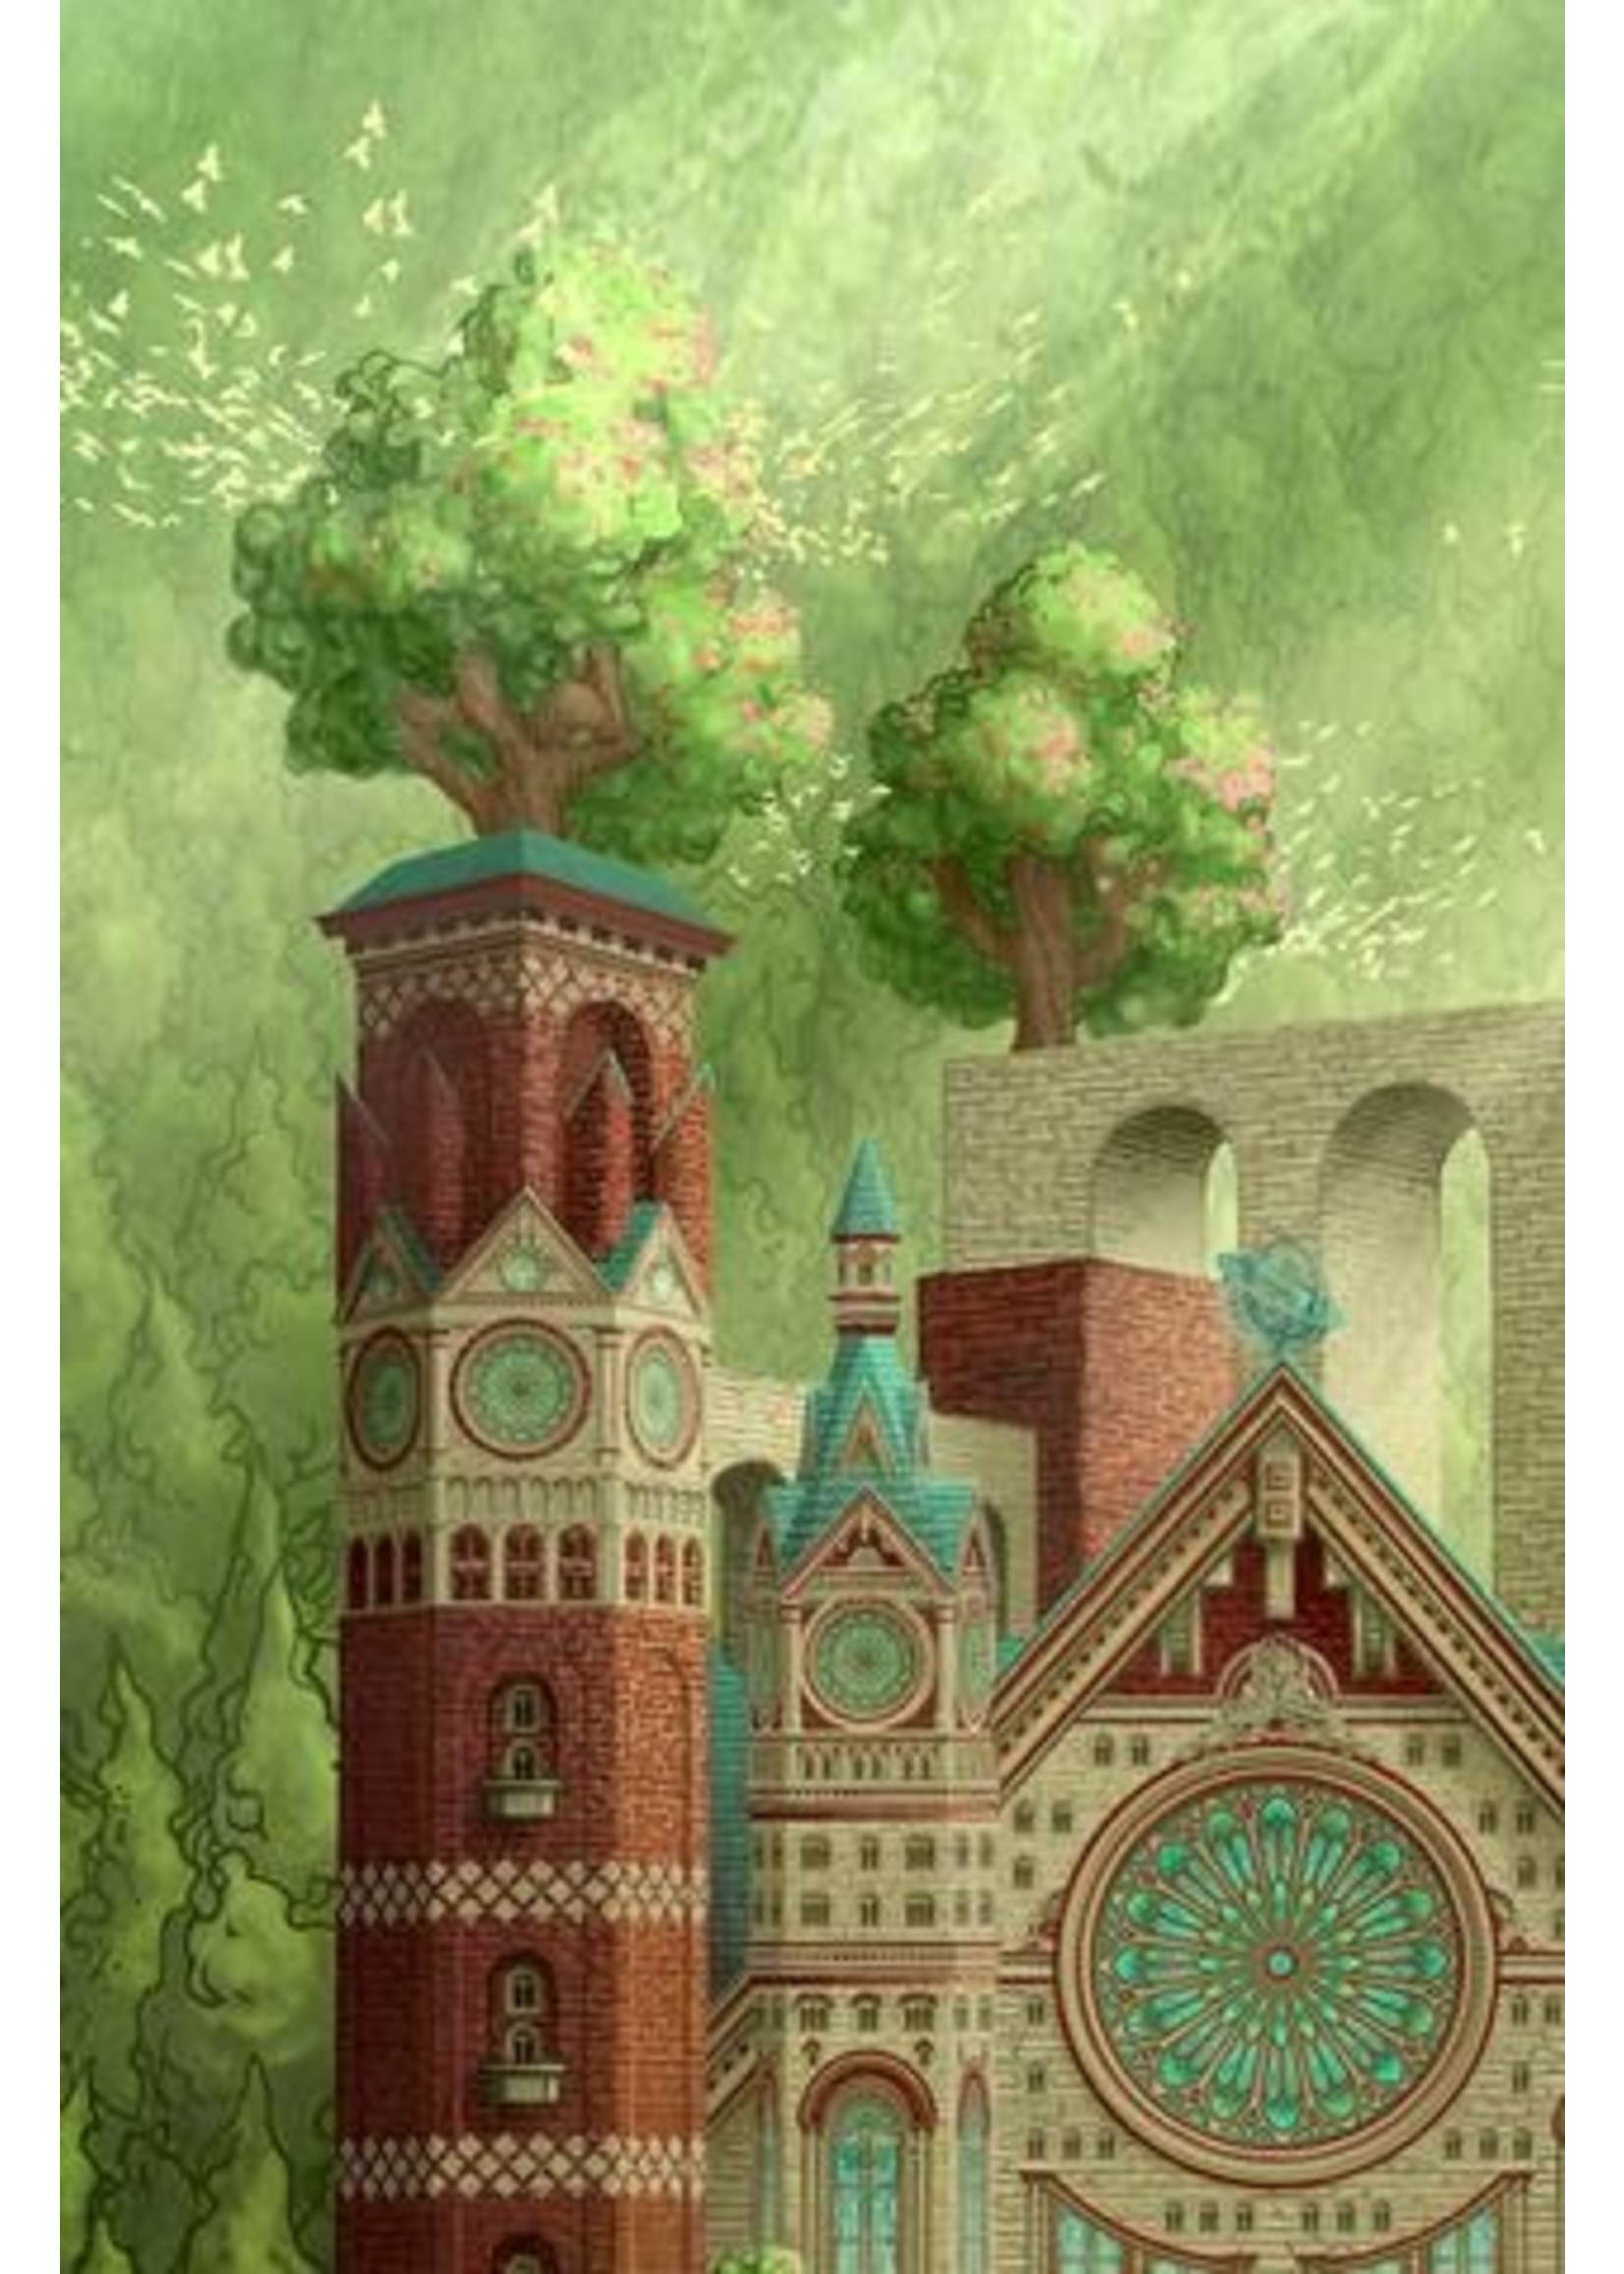 Artifact Puzzles "Cathedral of the Changing Tides" Wooden Jigsaw Puzzle